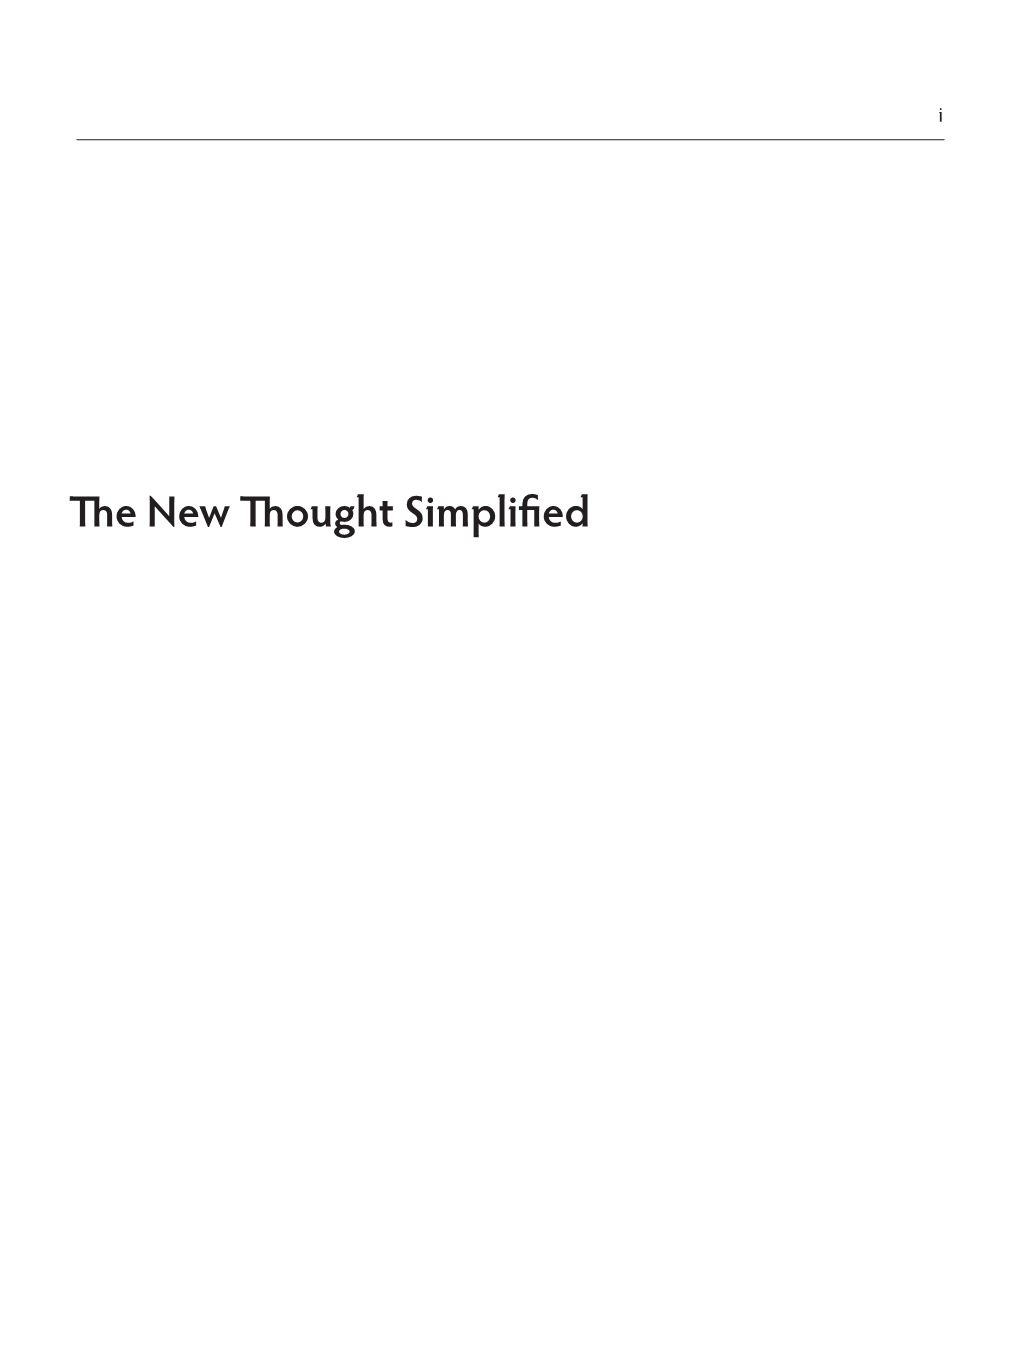 The New Thought Simplified by Henry Wood